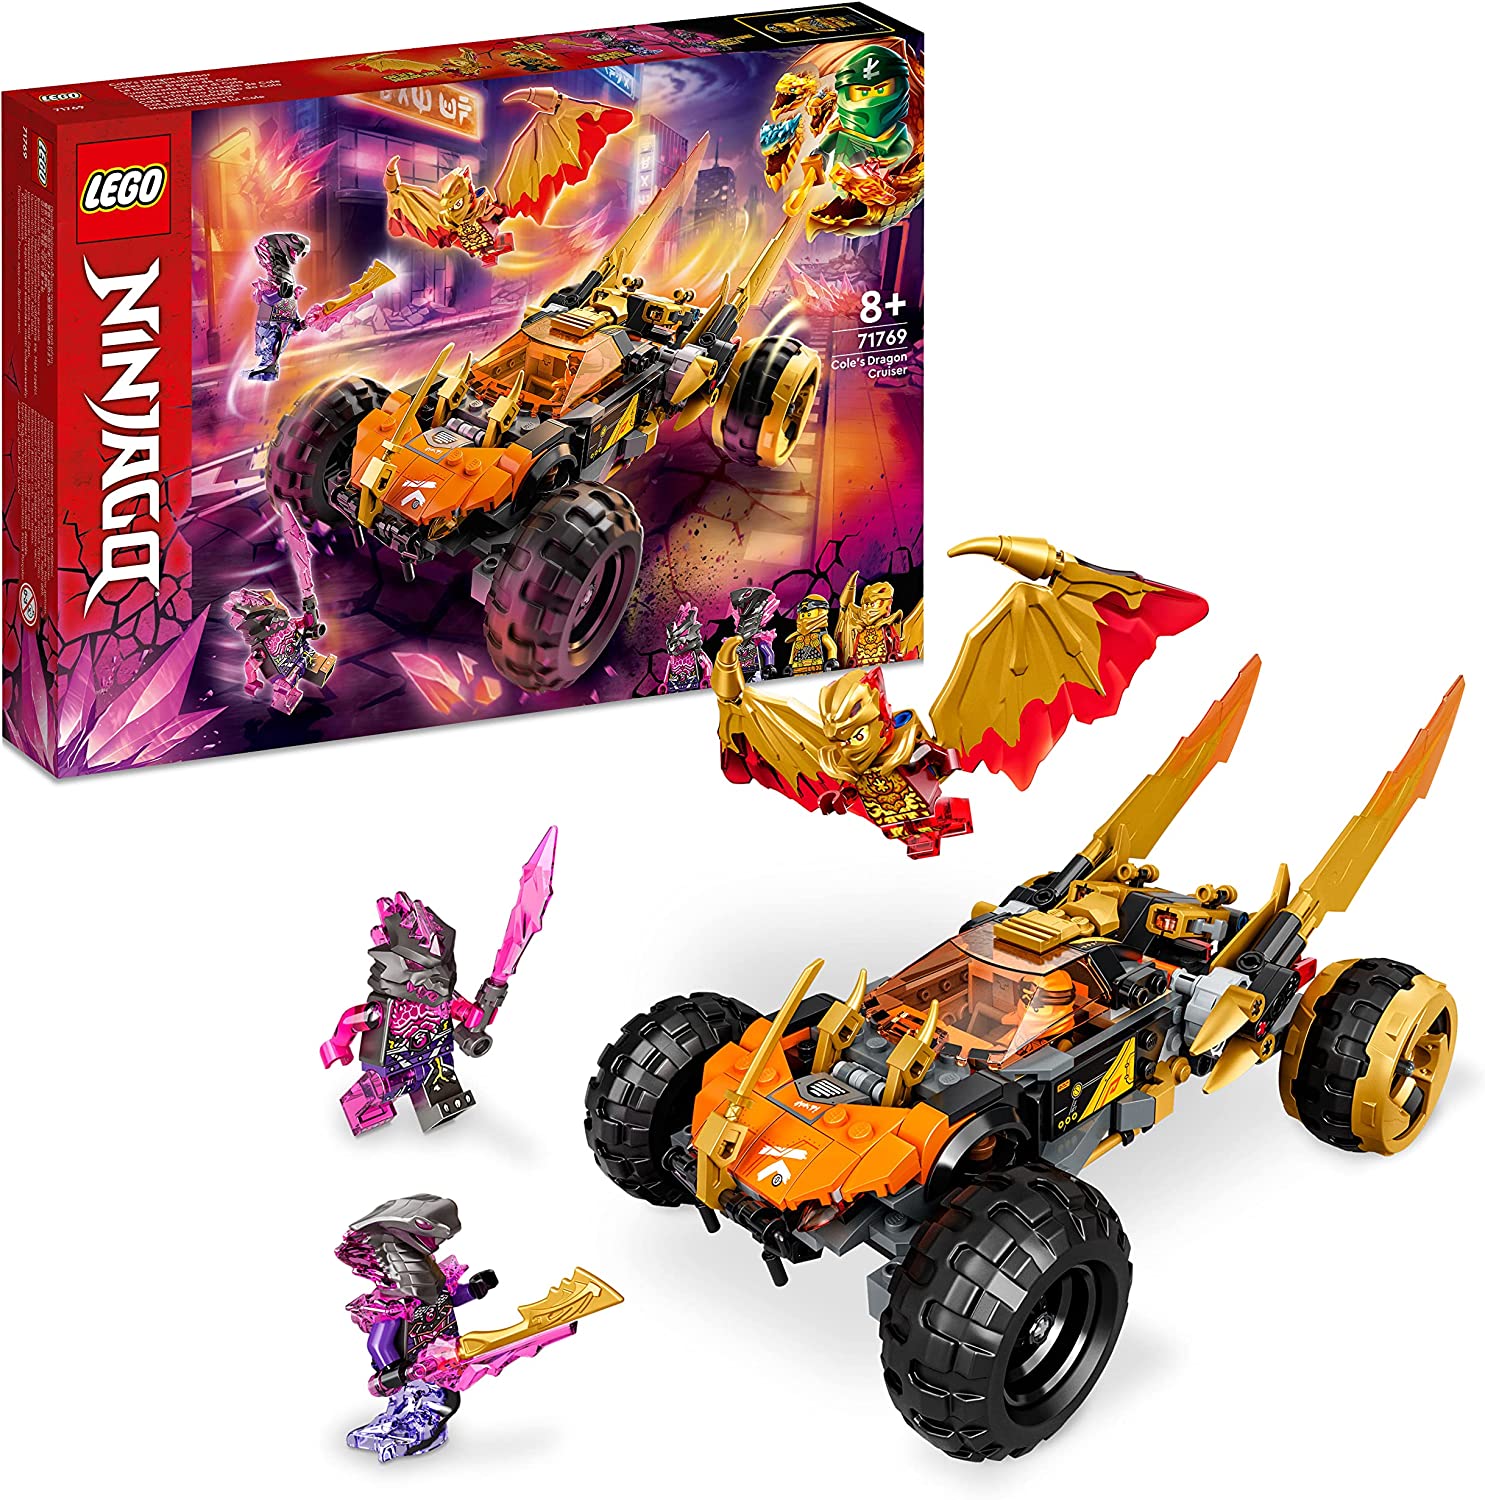 LEGO 71769 NINJAGO Coles Dragon Speedster Set for Children with Toy Car, Snake Figure and 3 Mini Figures, Includes Kai and Cole